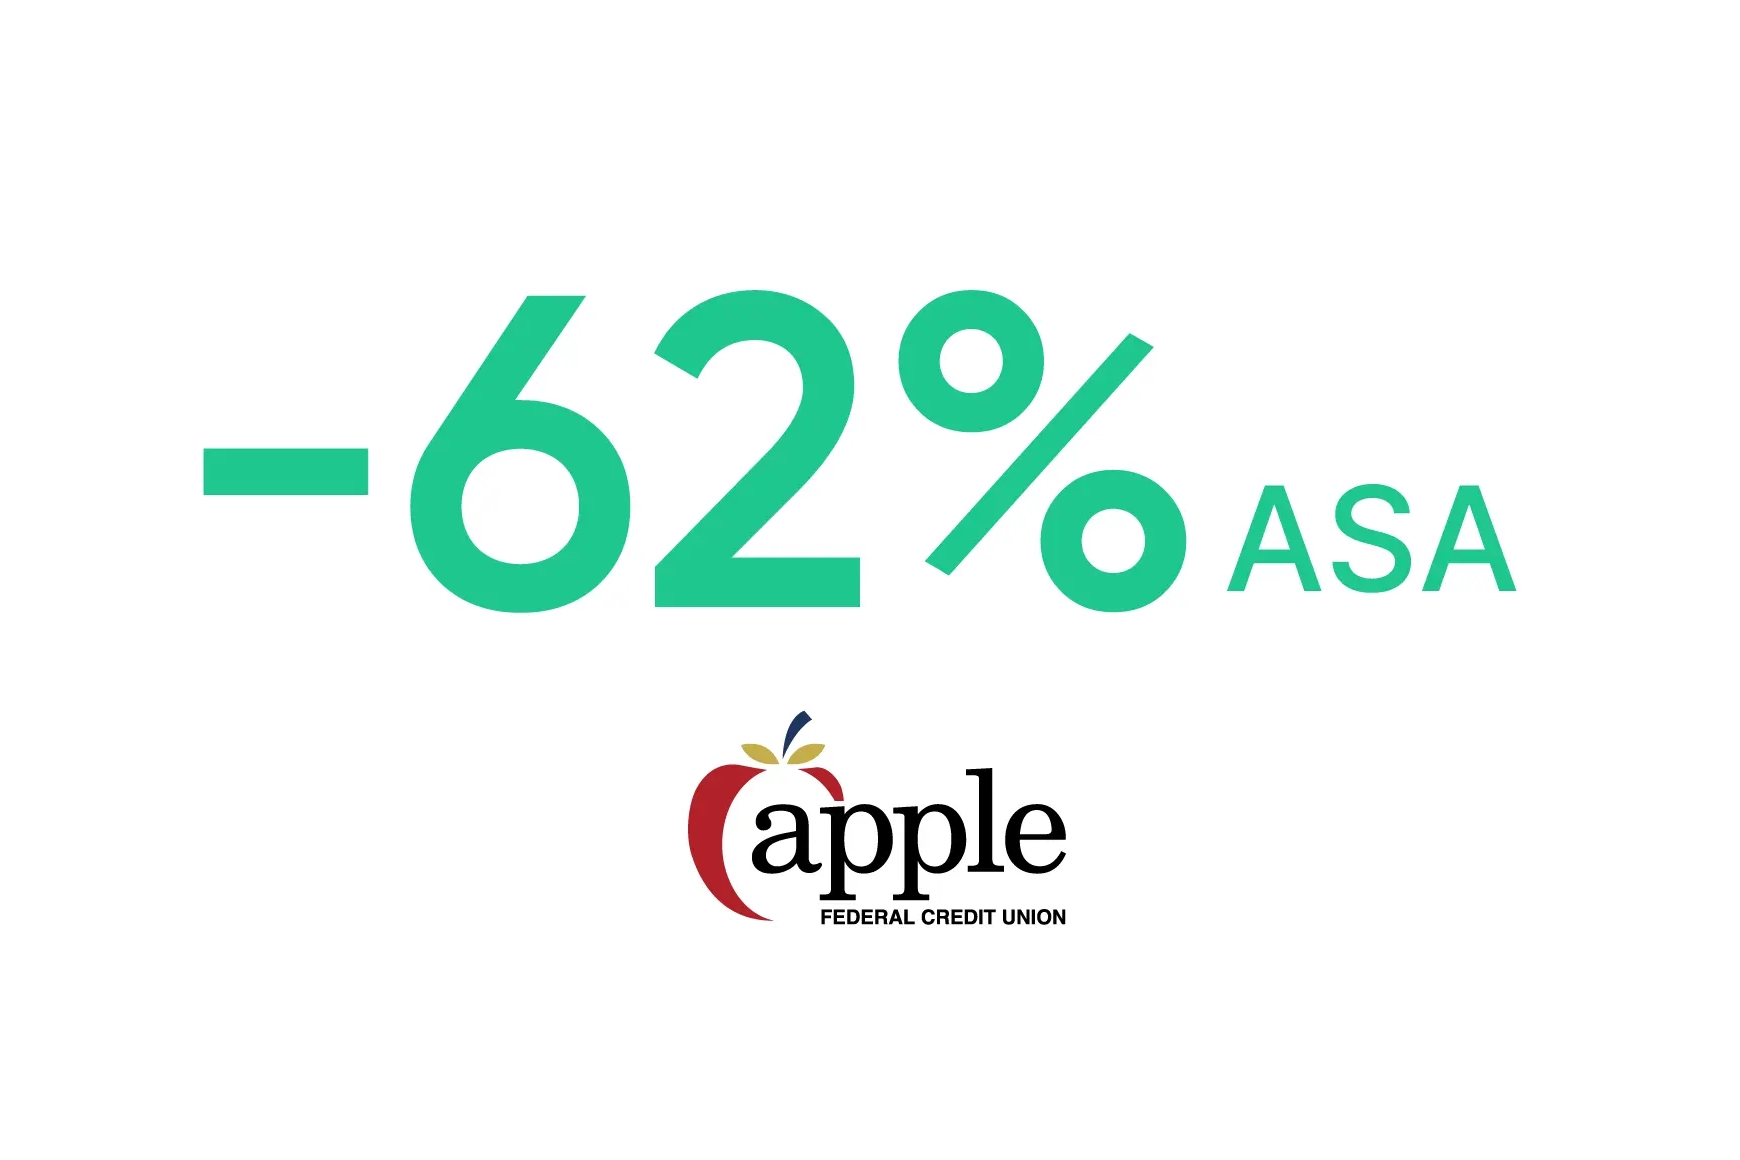 Apple Federal Credit Union reduced ASA by 62%